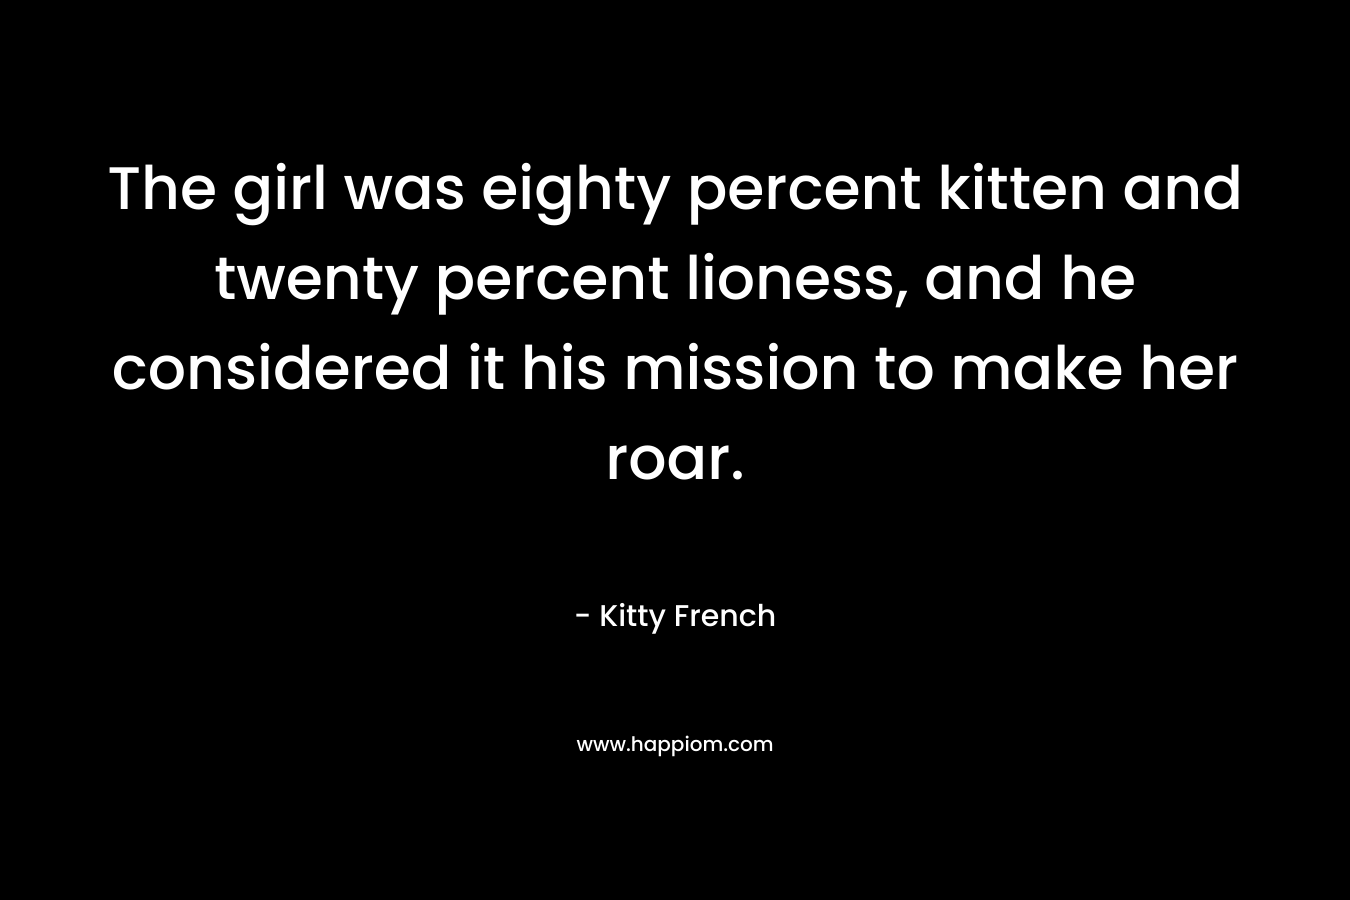 The girl was eighty percent kitten and twenty percent lioness, and he considered it his mission to make her roar. – Kitty French